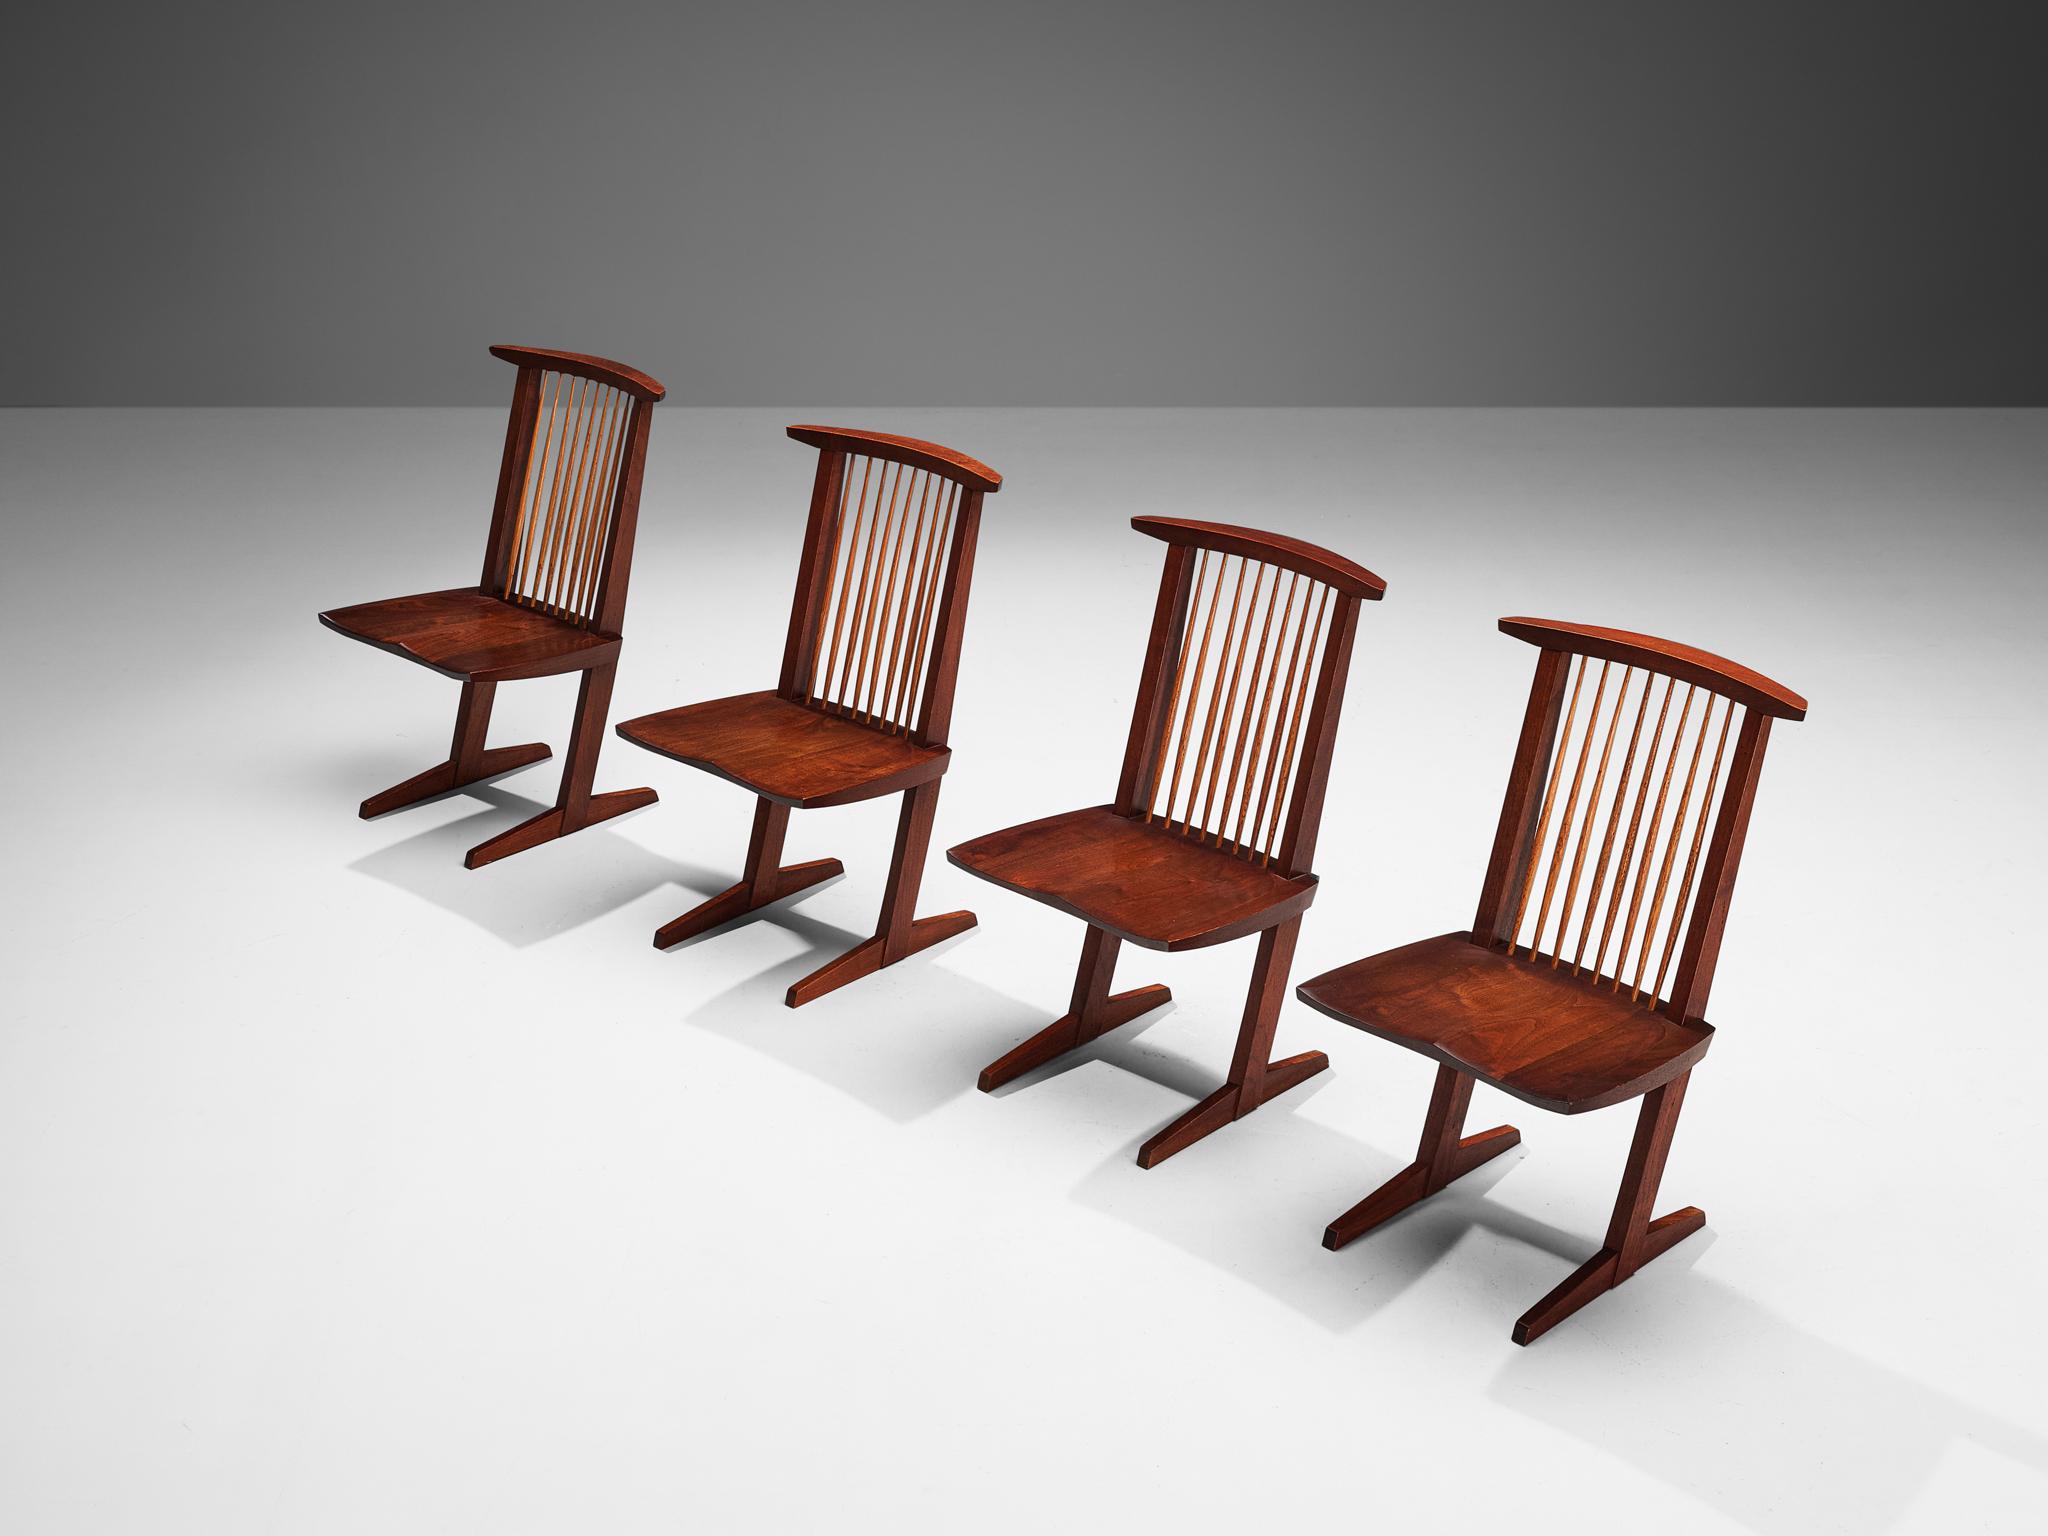 George Nakashima for Nakashima Studio, set of four 'Conoid' chairs, walnut, hickory, United States, 1962

This stunning set of four Conoid dining chairs are designed by woodwork master George Nakashima and made in 1962. The most striking feature of